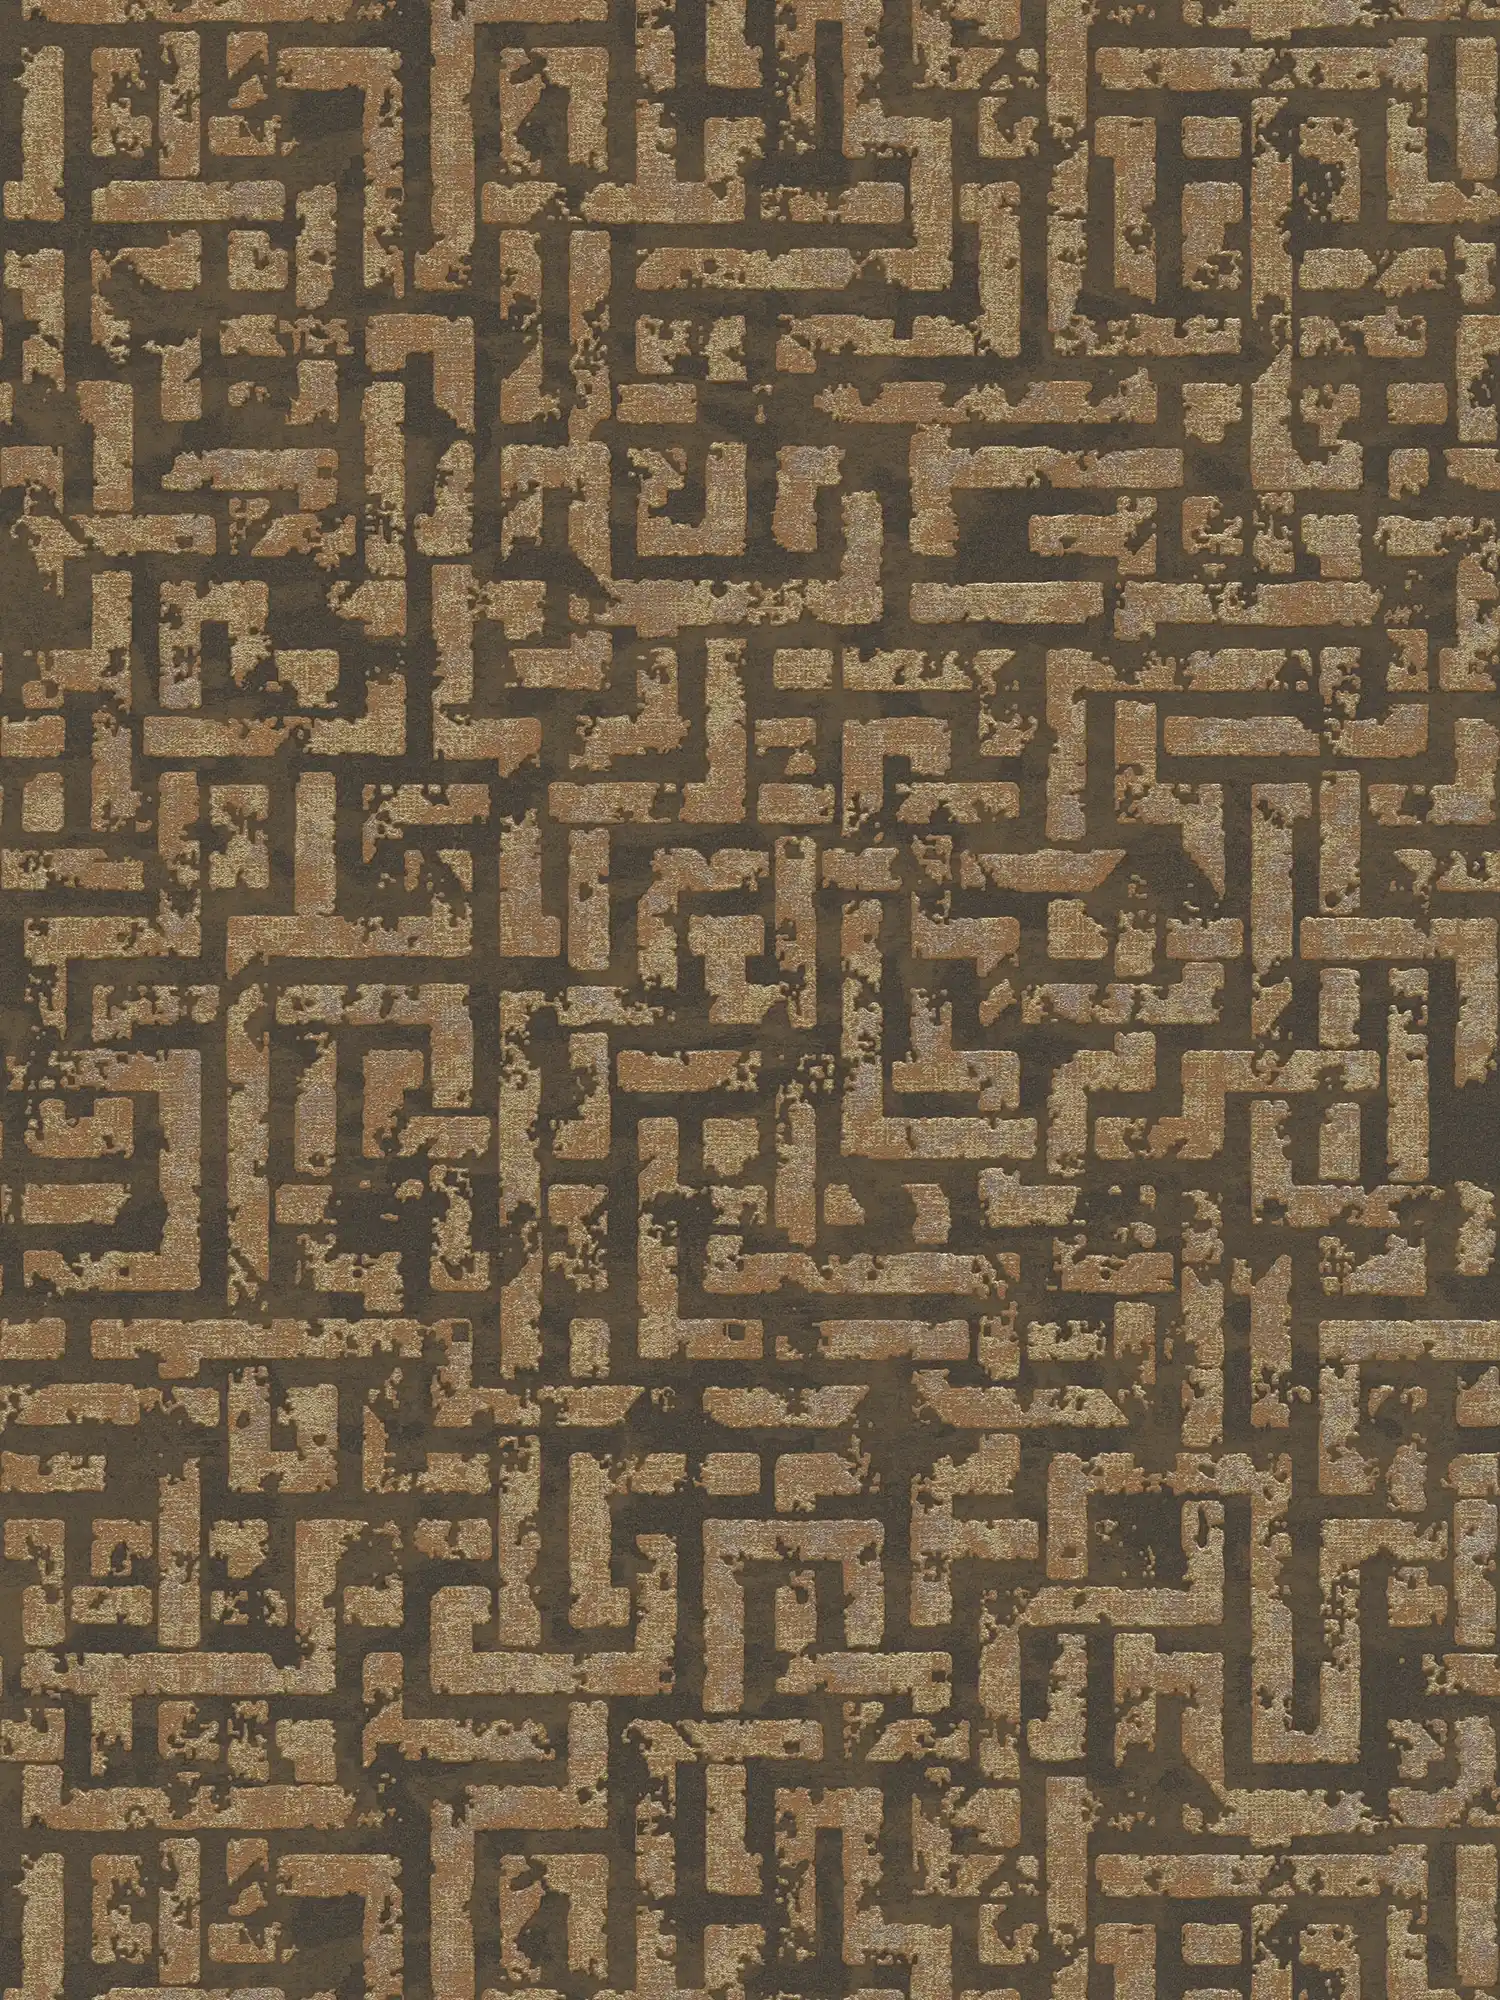 Ethno pattern wallpaper with used design & relief graphics - Brown, Metallic
